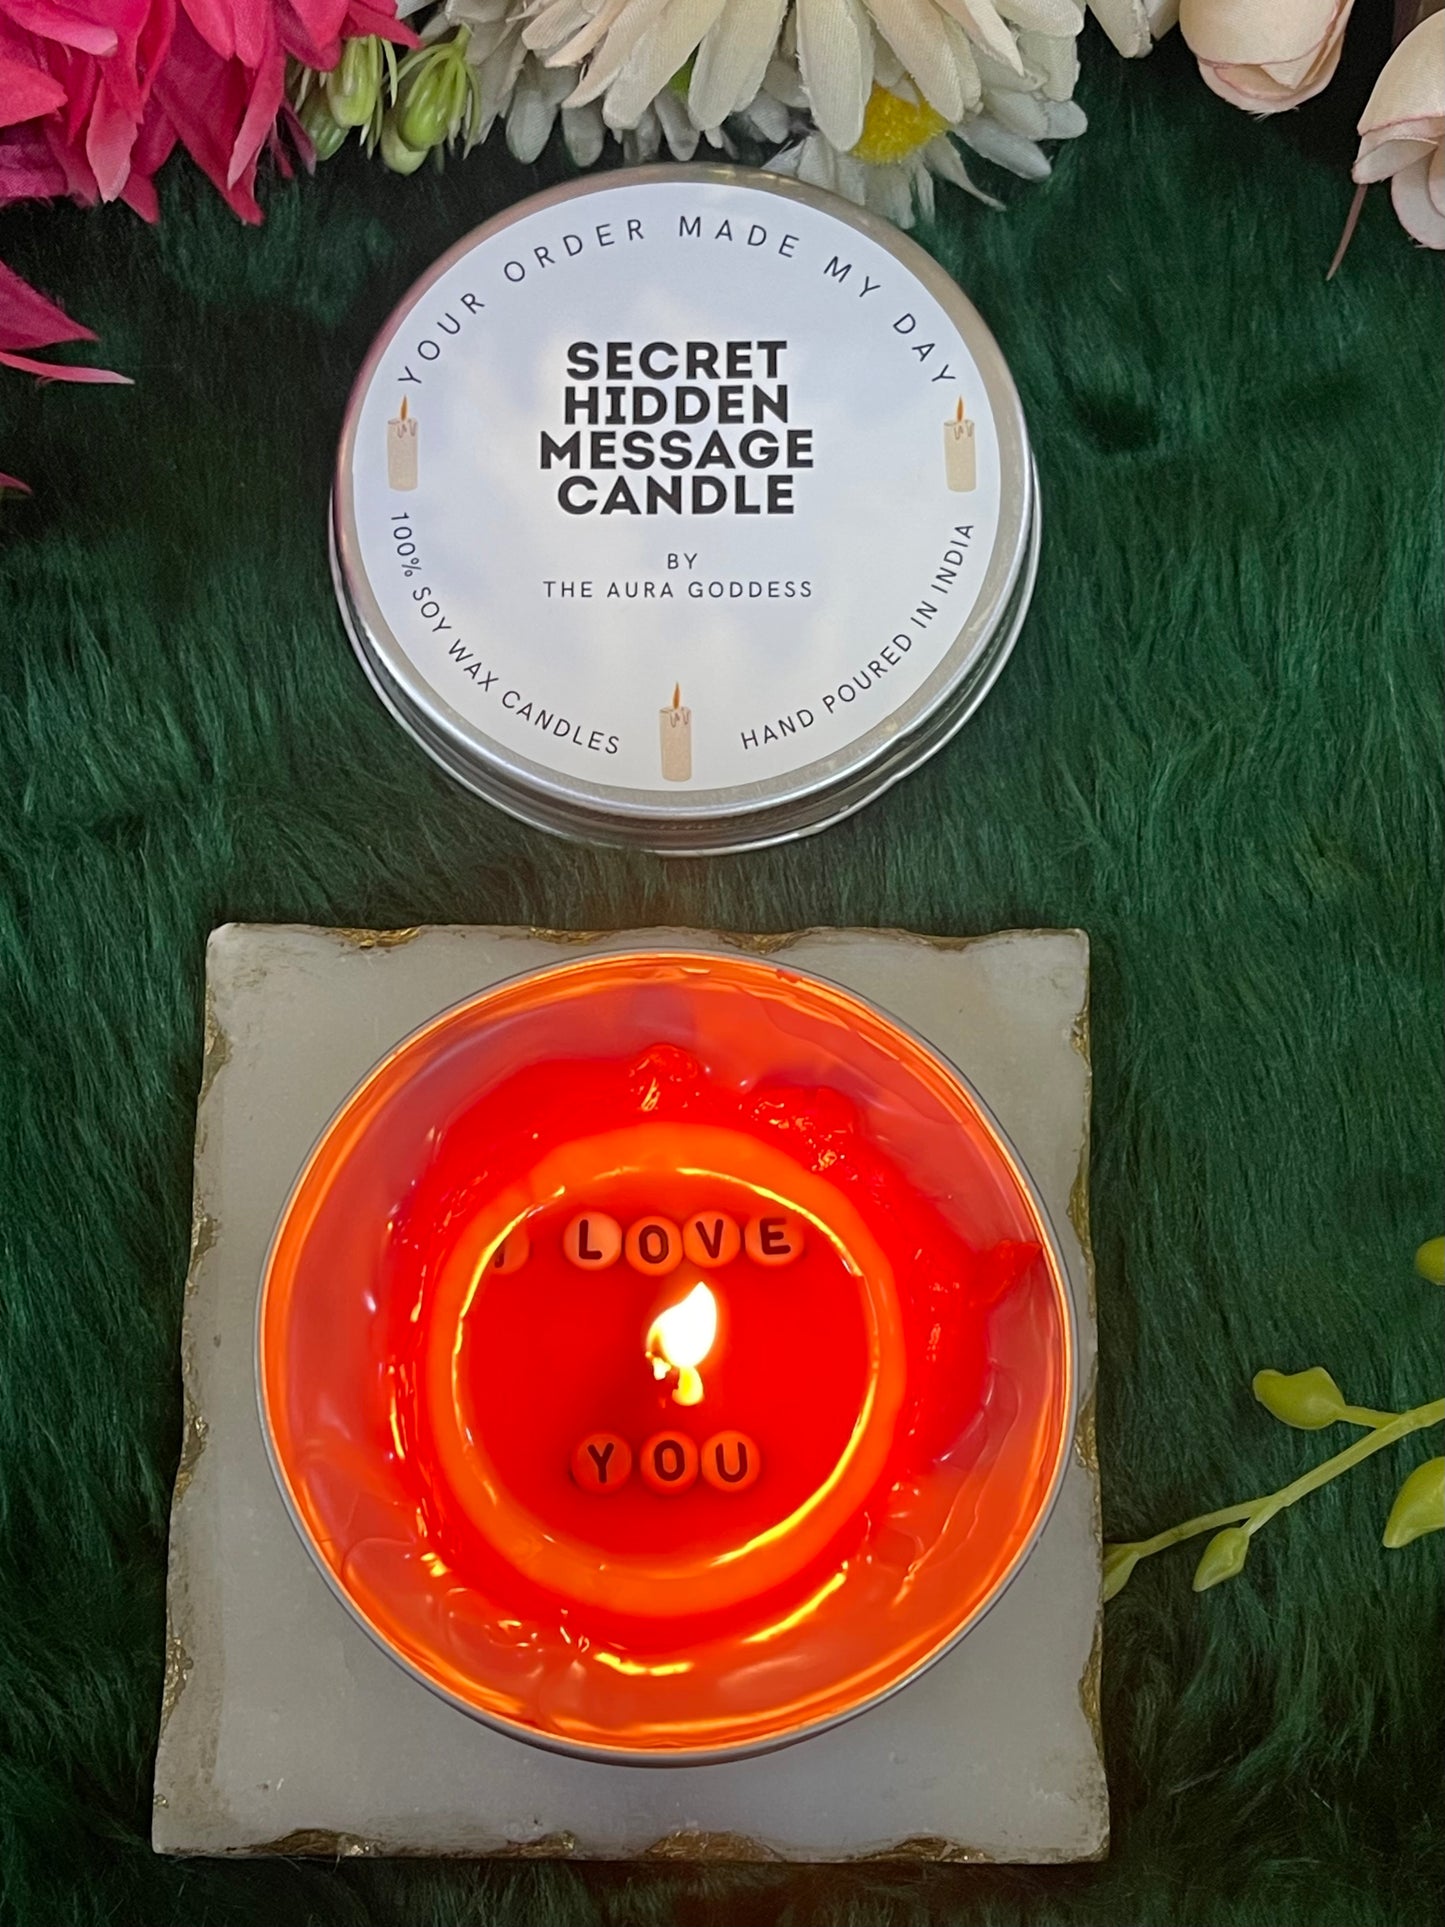 Secret hidden message candle with topping